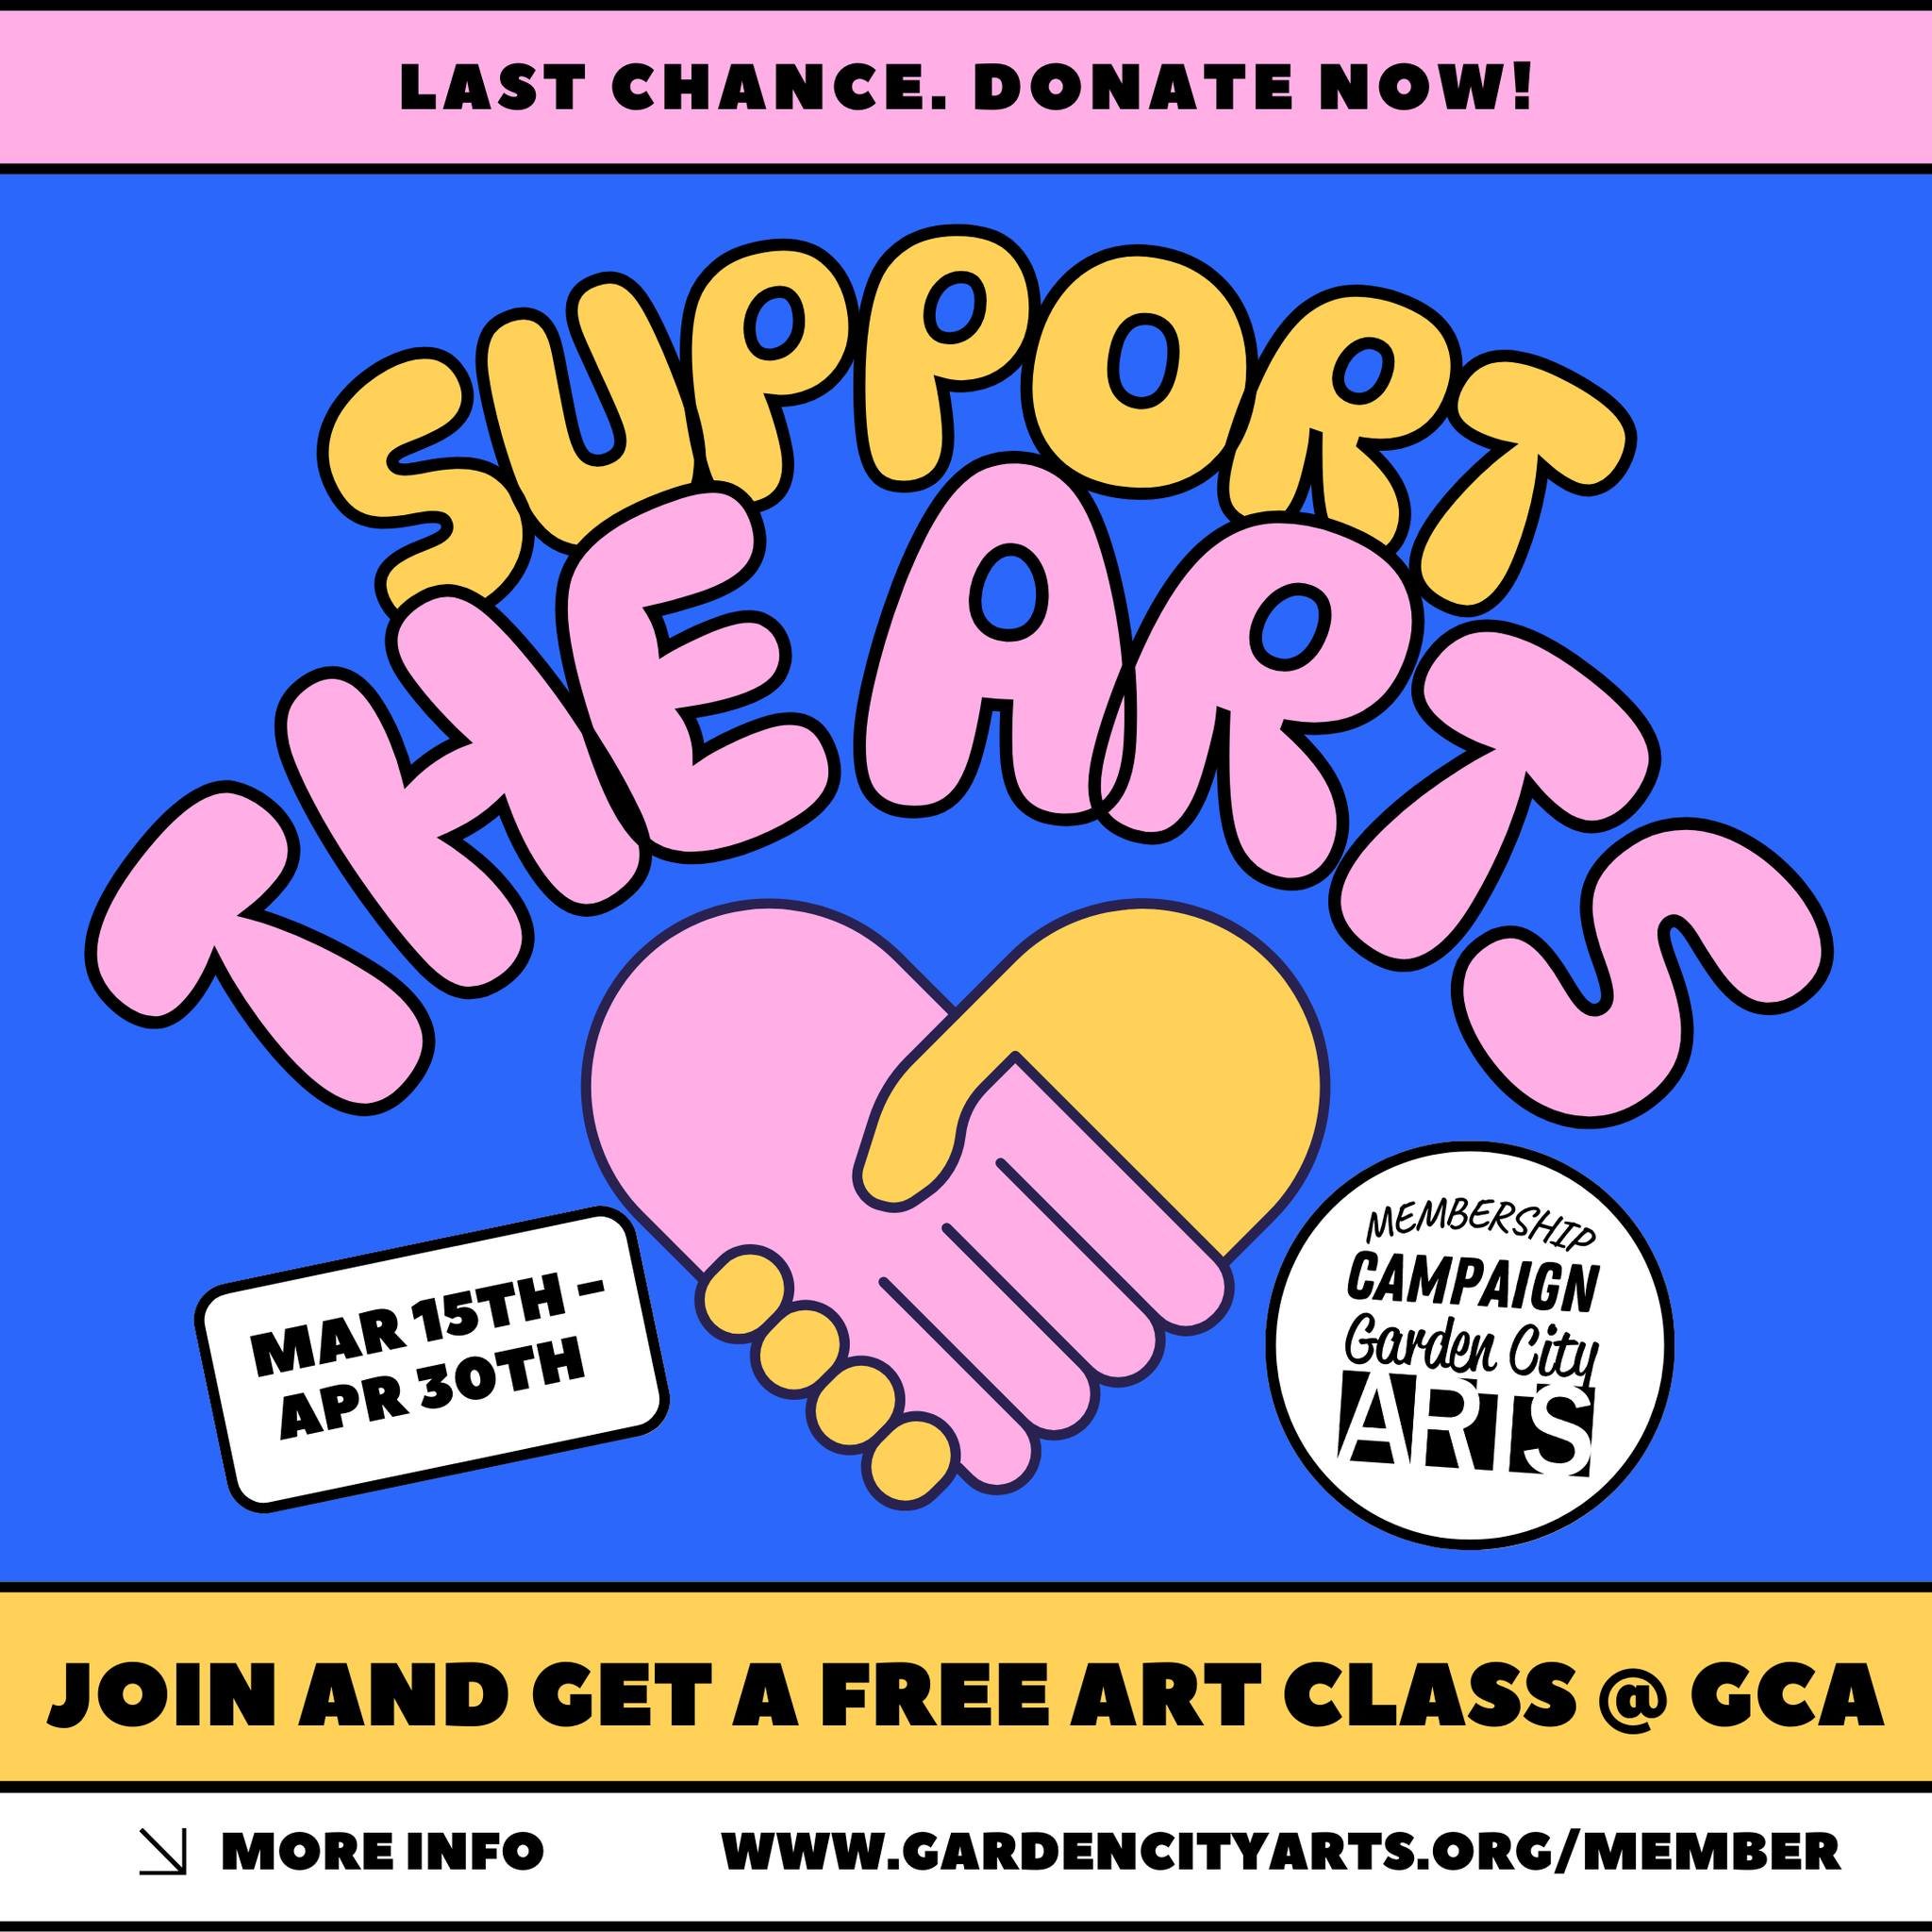 The Spring Membership Campaign ends next week on April 30th! This is your last chance to begin/renew your membership AND get a free class at GCA. 

Stop by the gallery to donate in person OR donate online here: https://gardencityarts.networkforgood.c